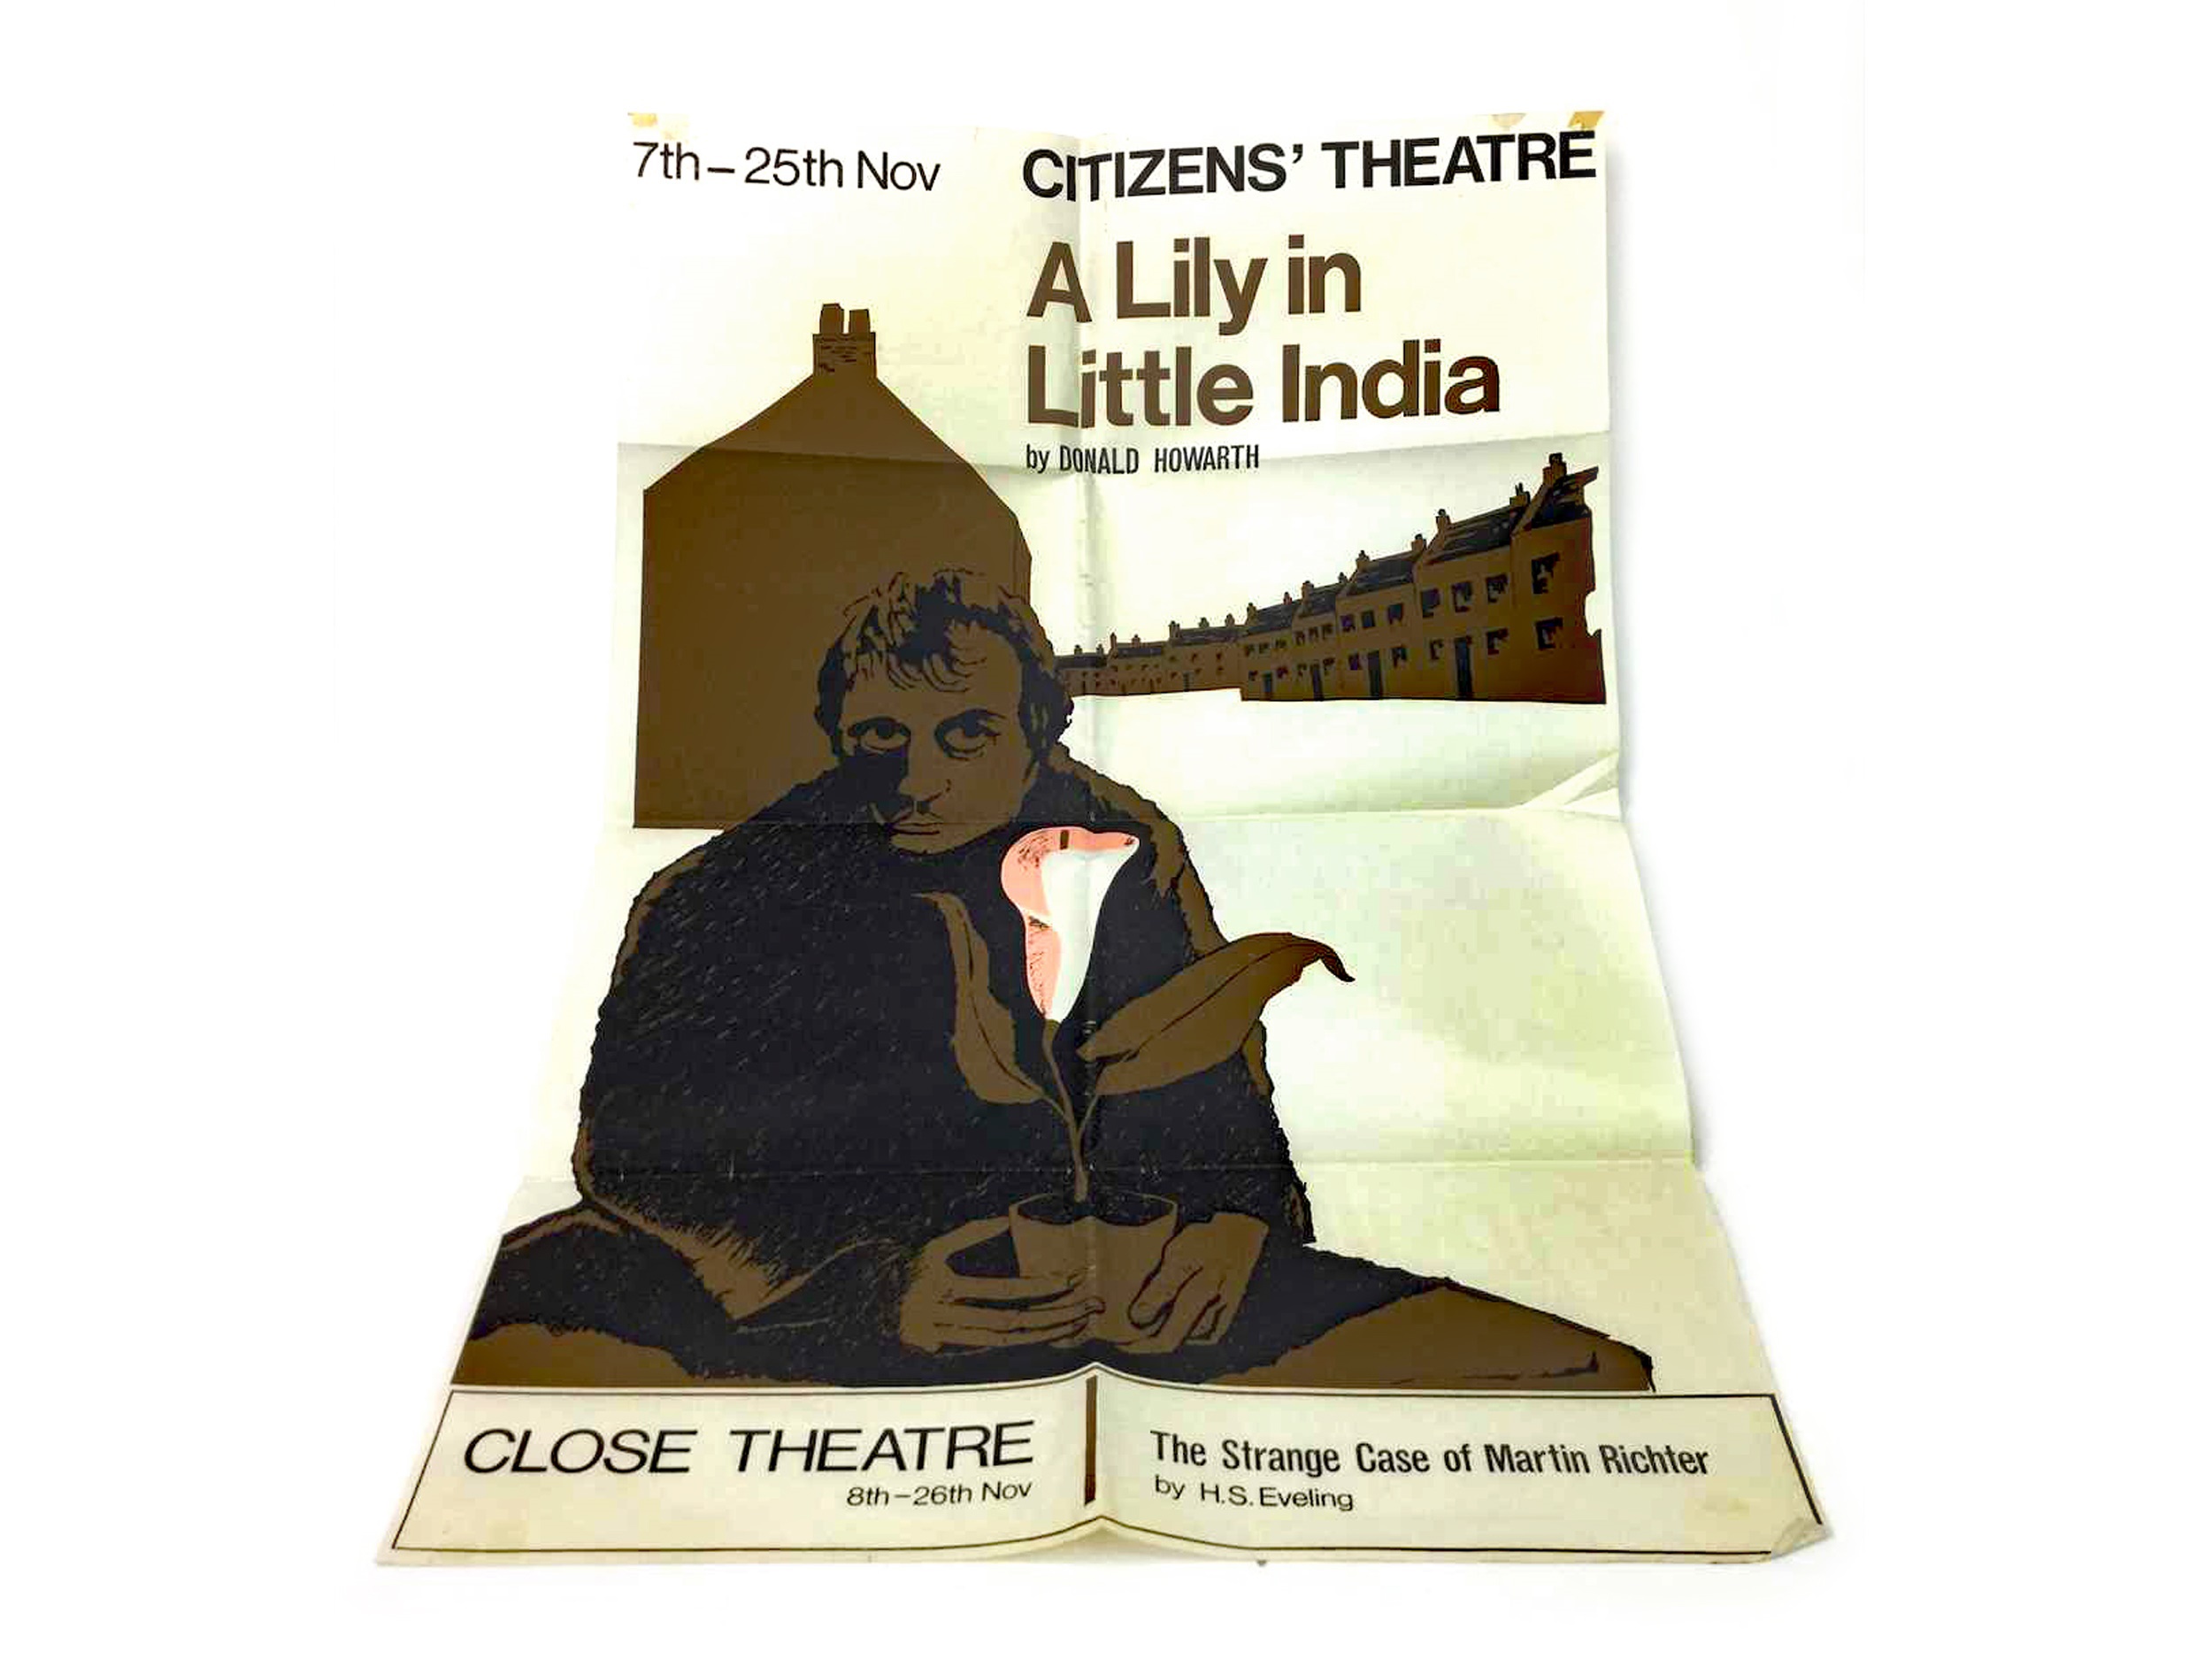 A CITIZENS THEATRE POSTER FOR 'A LILY IN LITTLE INDIA'